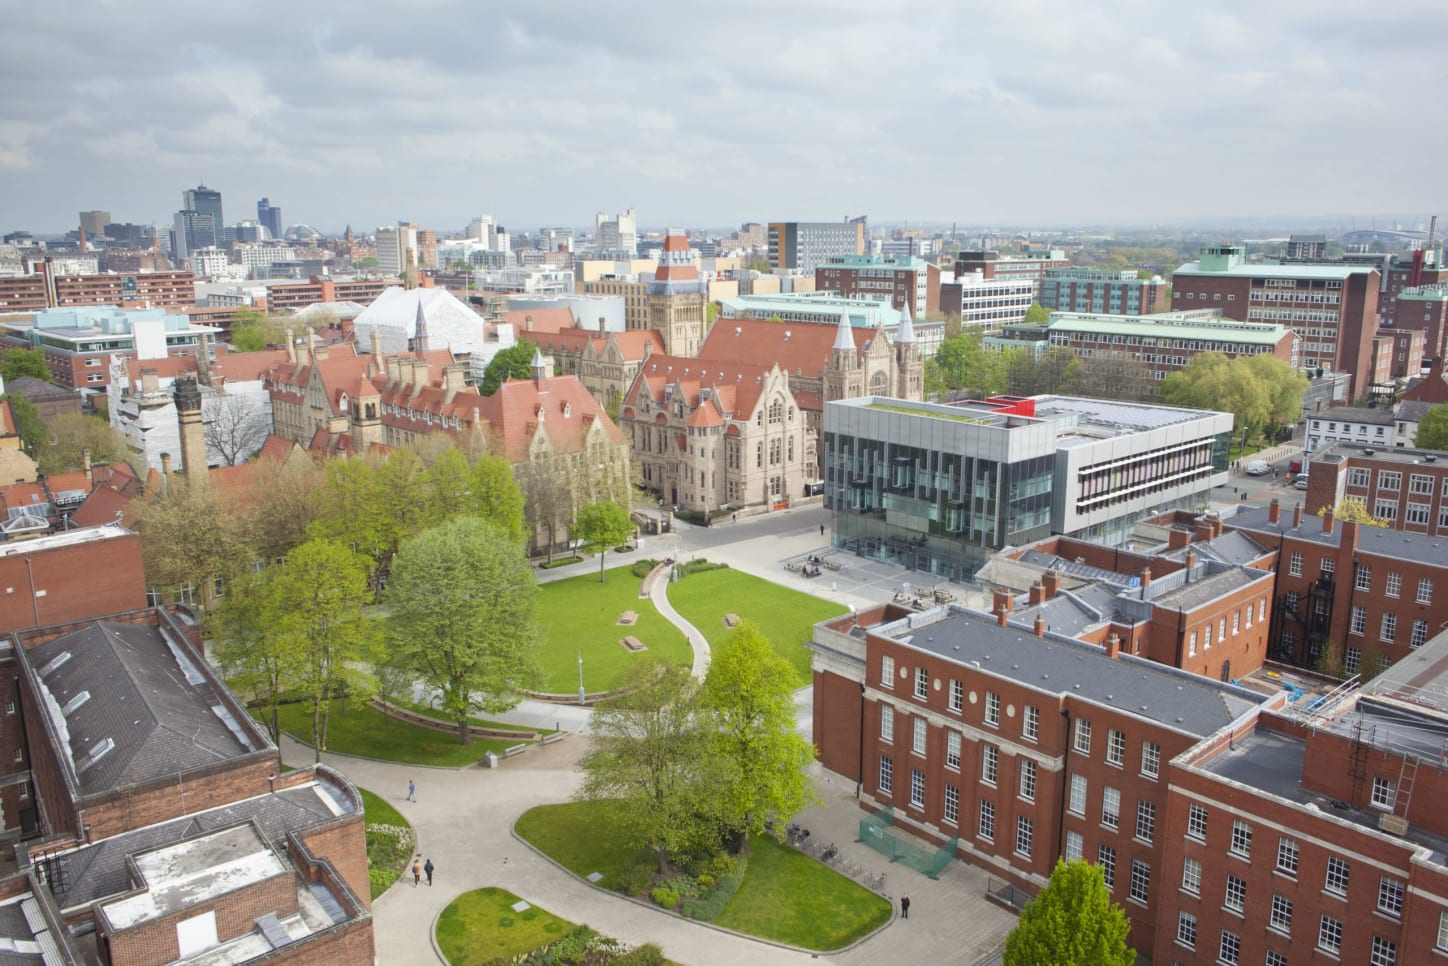 University of Manchester BA in Liberal Arts